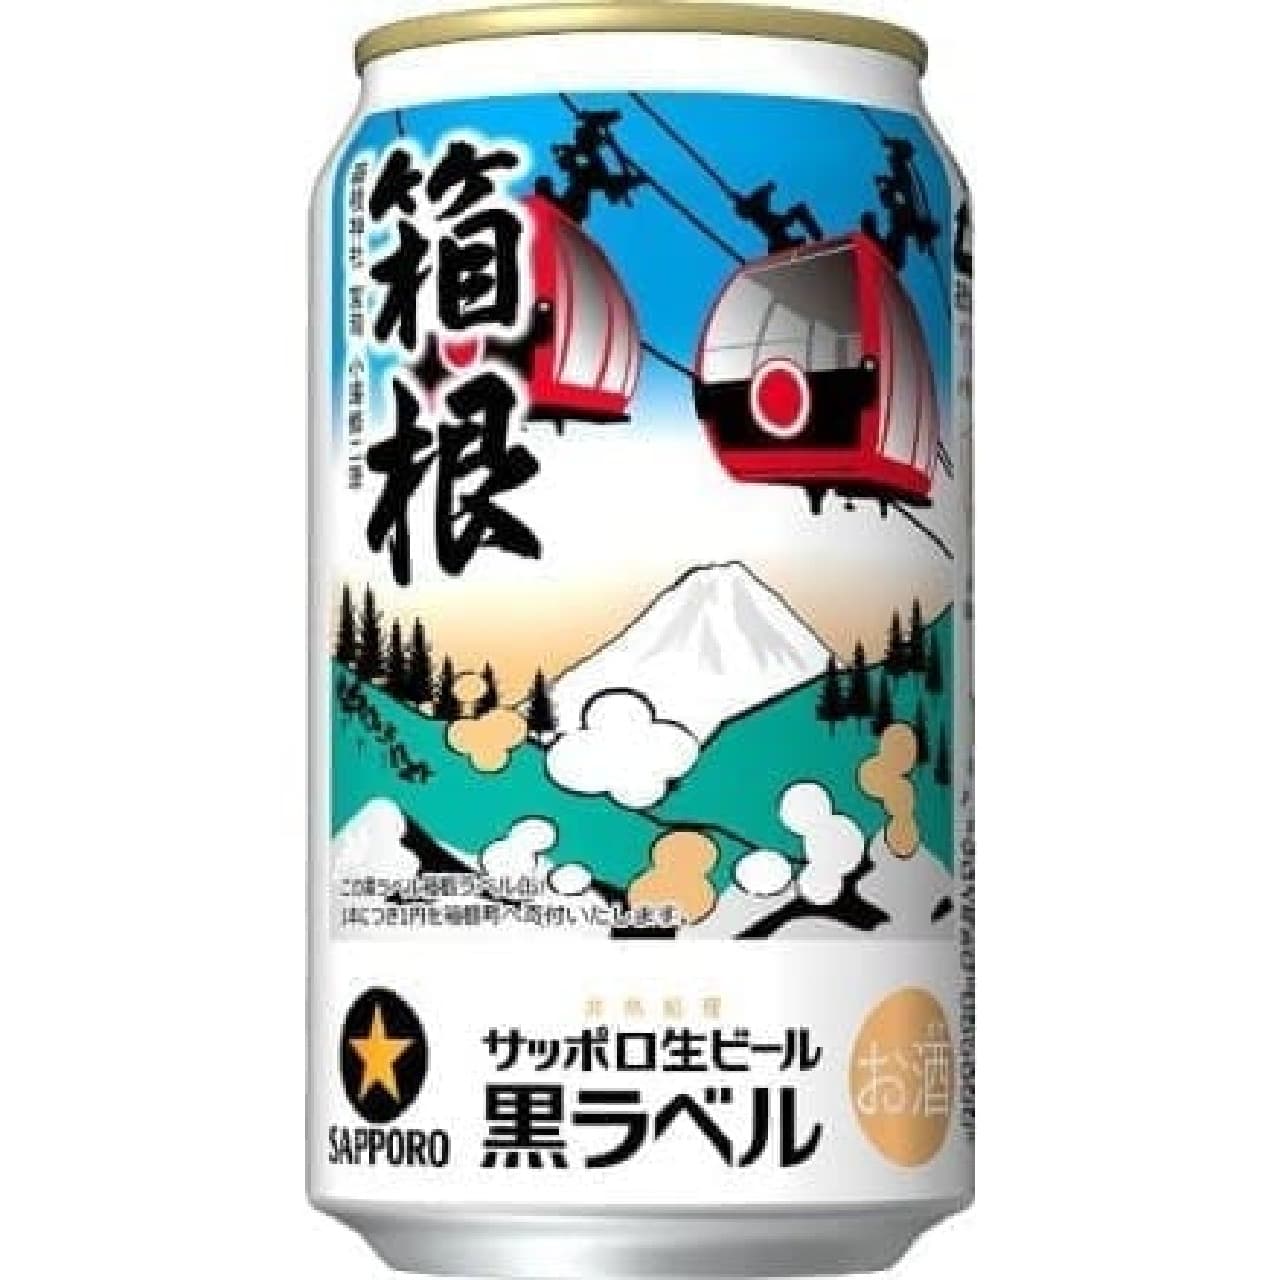 Sapporo raw beer black label "Hakone label" can